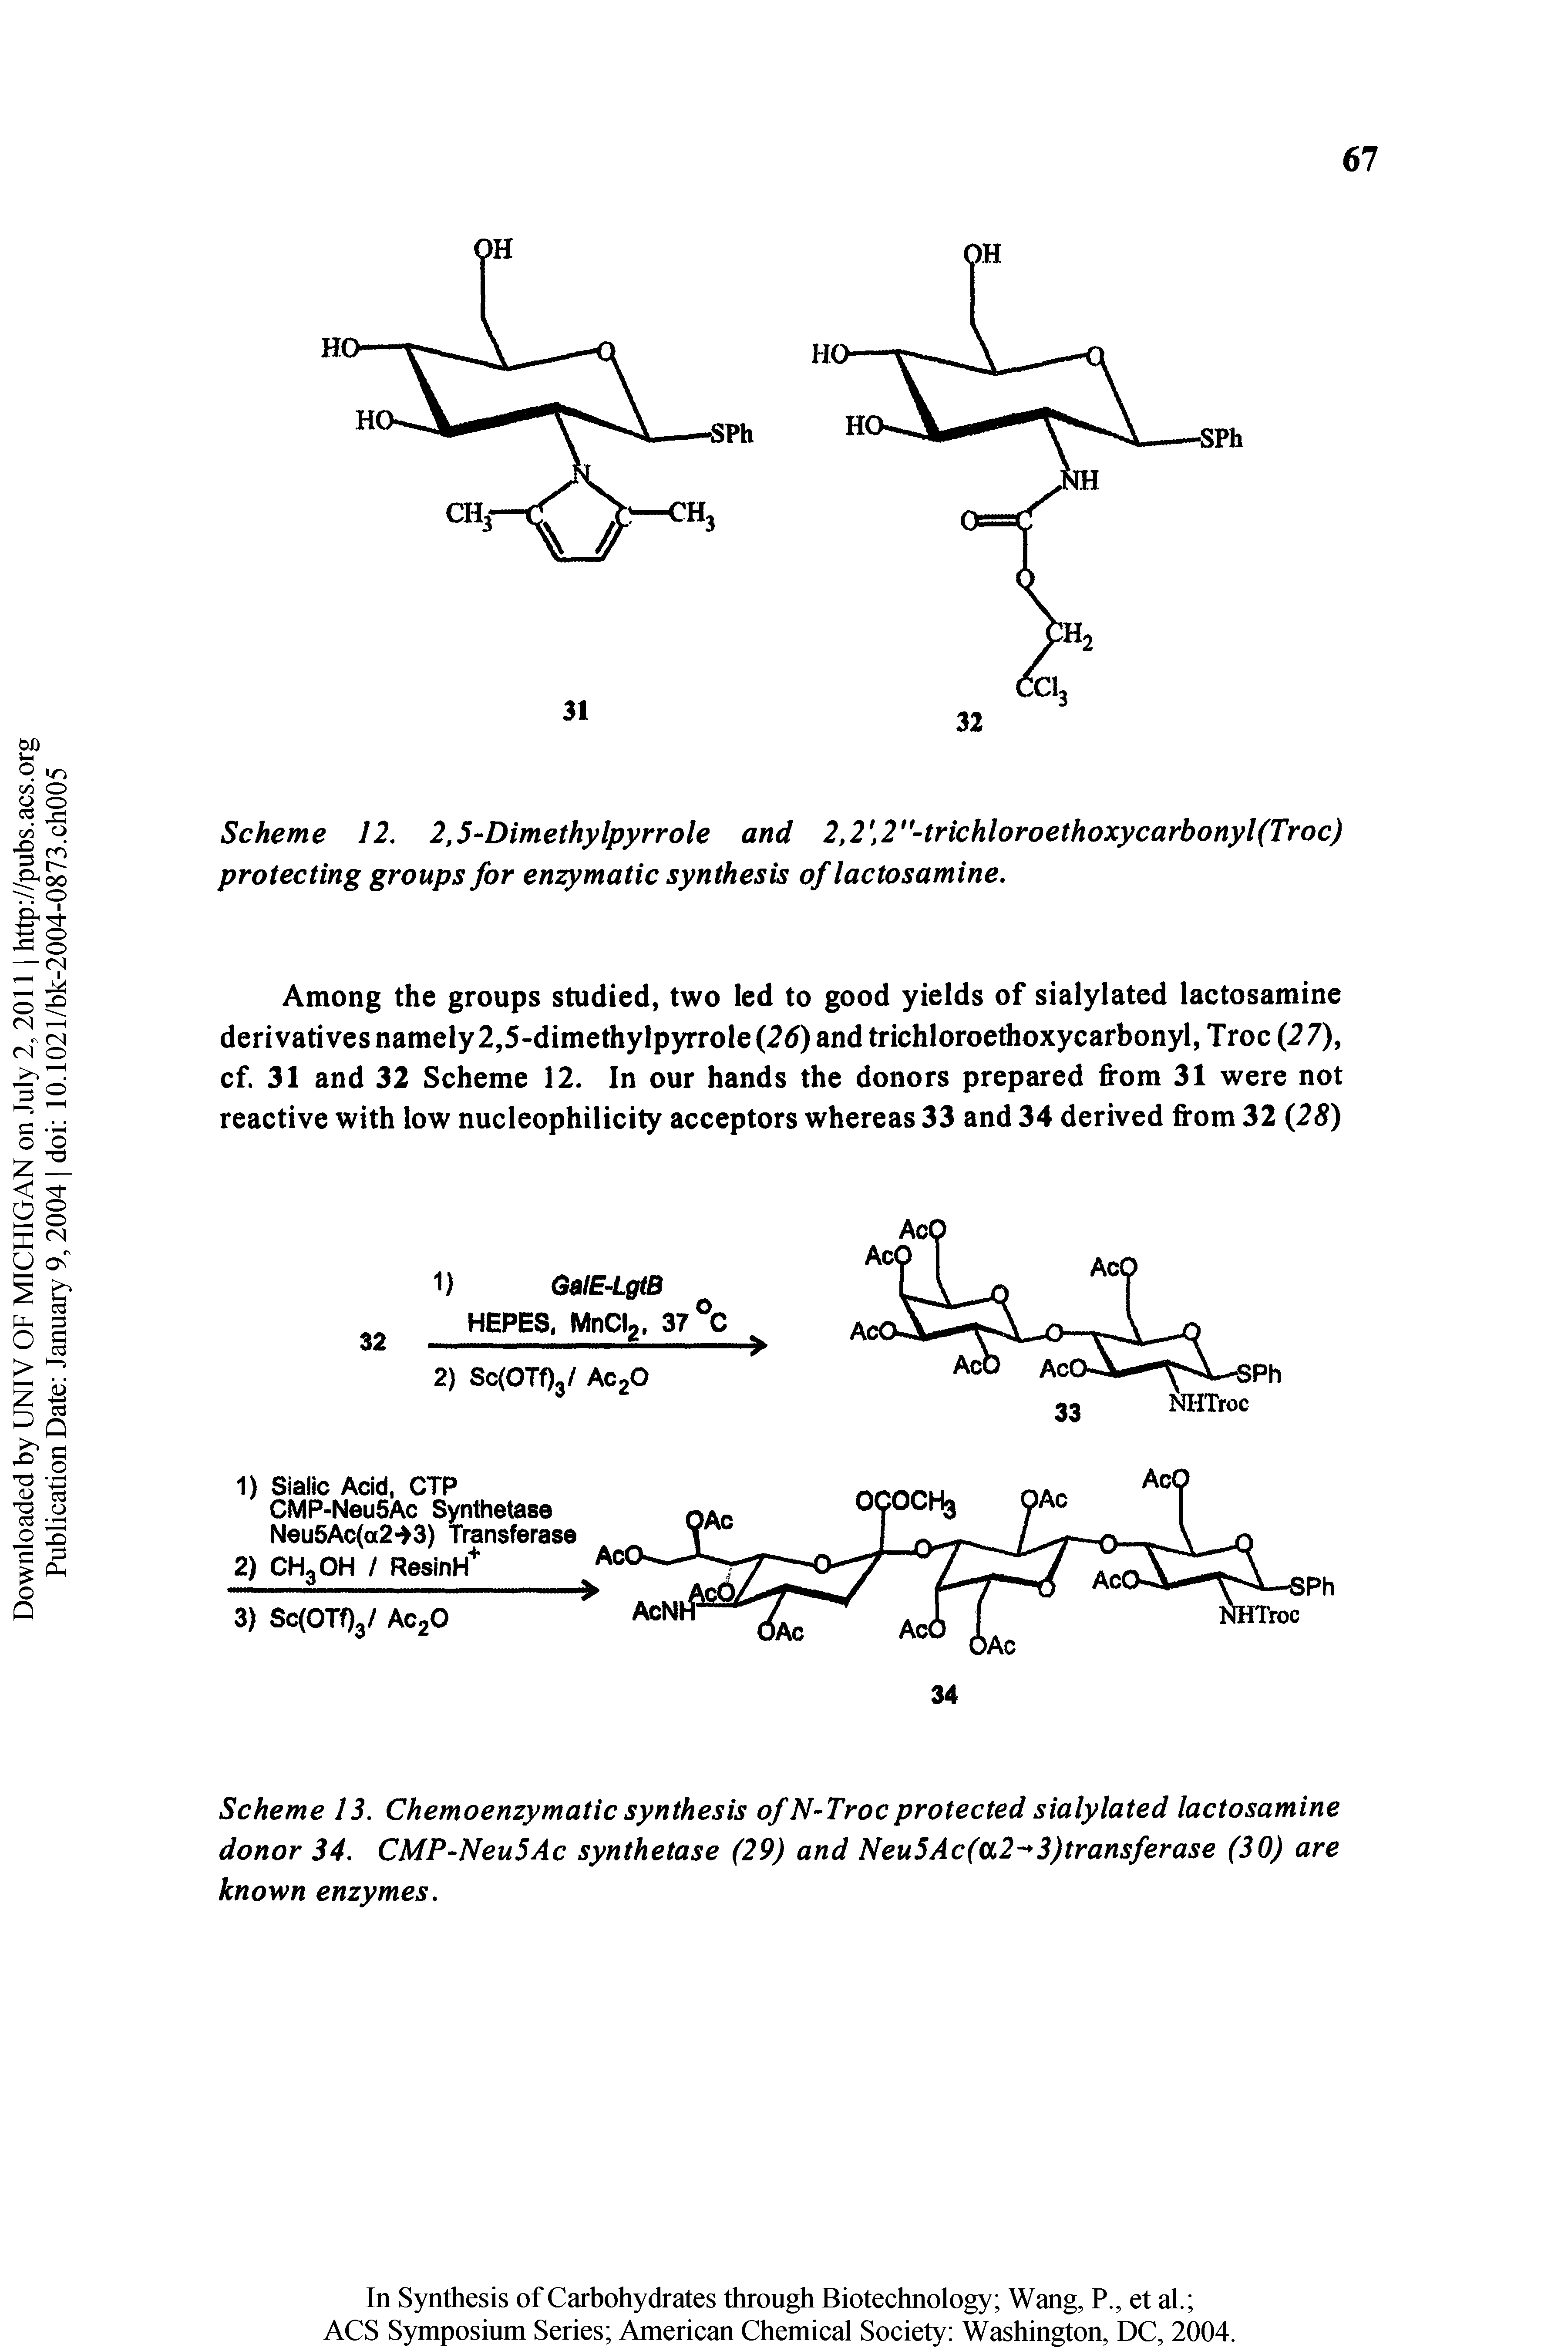 Scheme 12, 2,5-Dimethylpyrrole and 2,2 2 trichloroethoxycarbonyl(Troc) protecting groups for enzymatic synthesis of lactosamine.